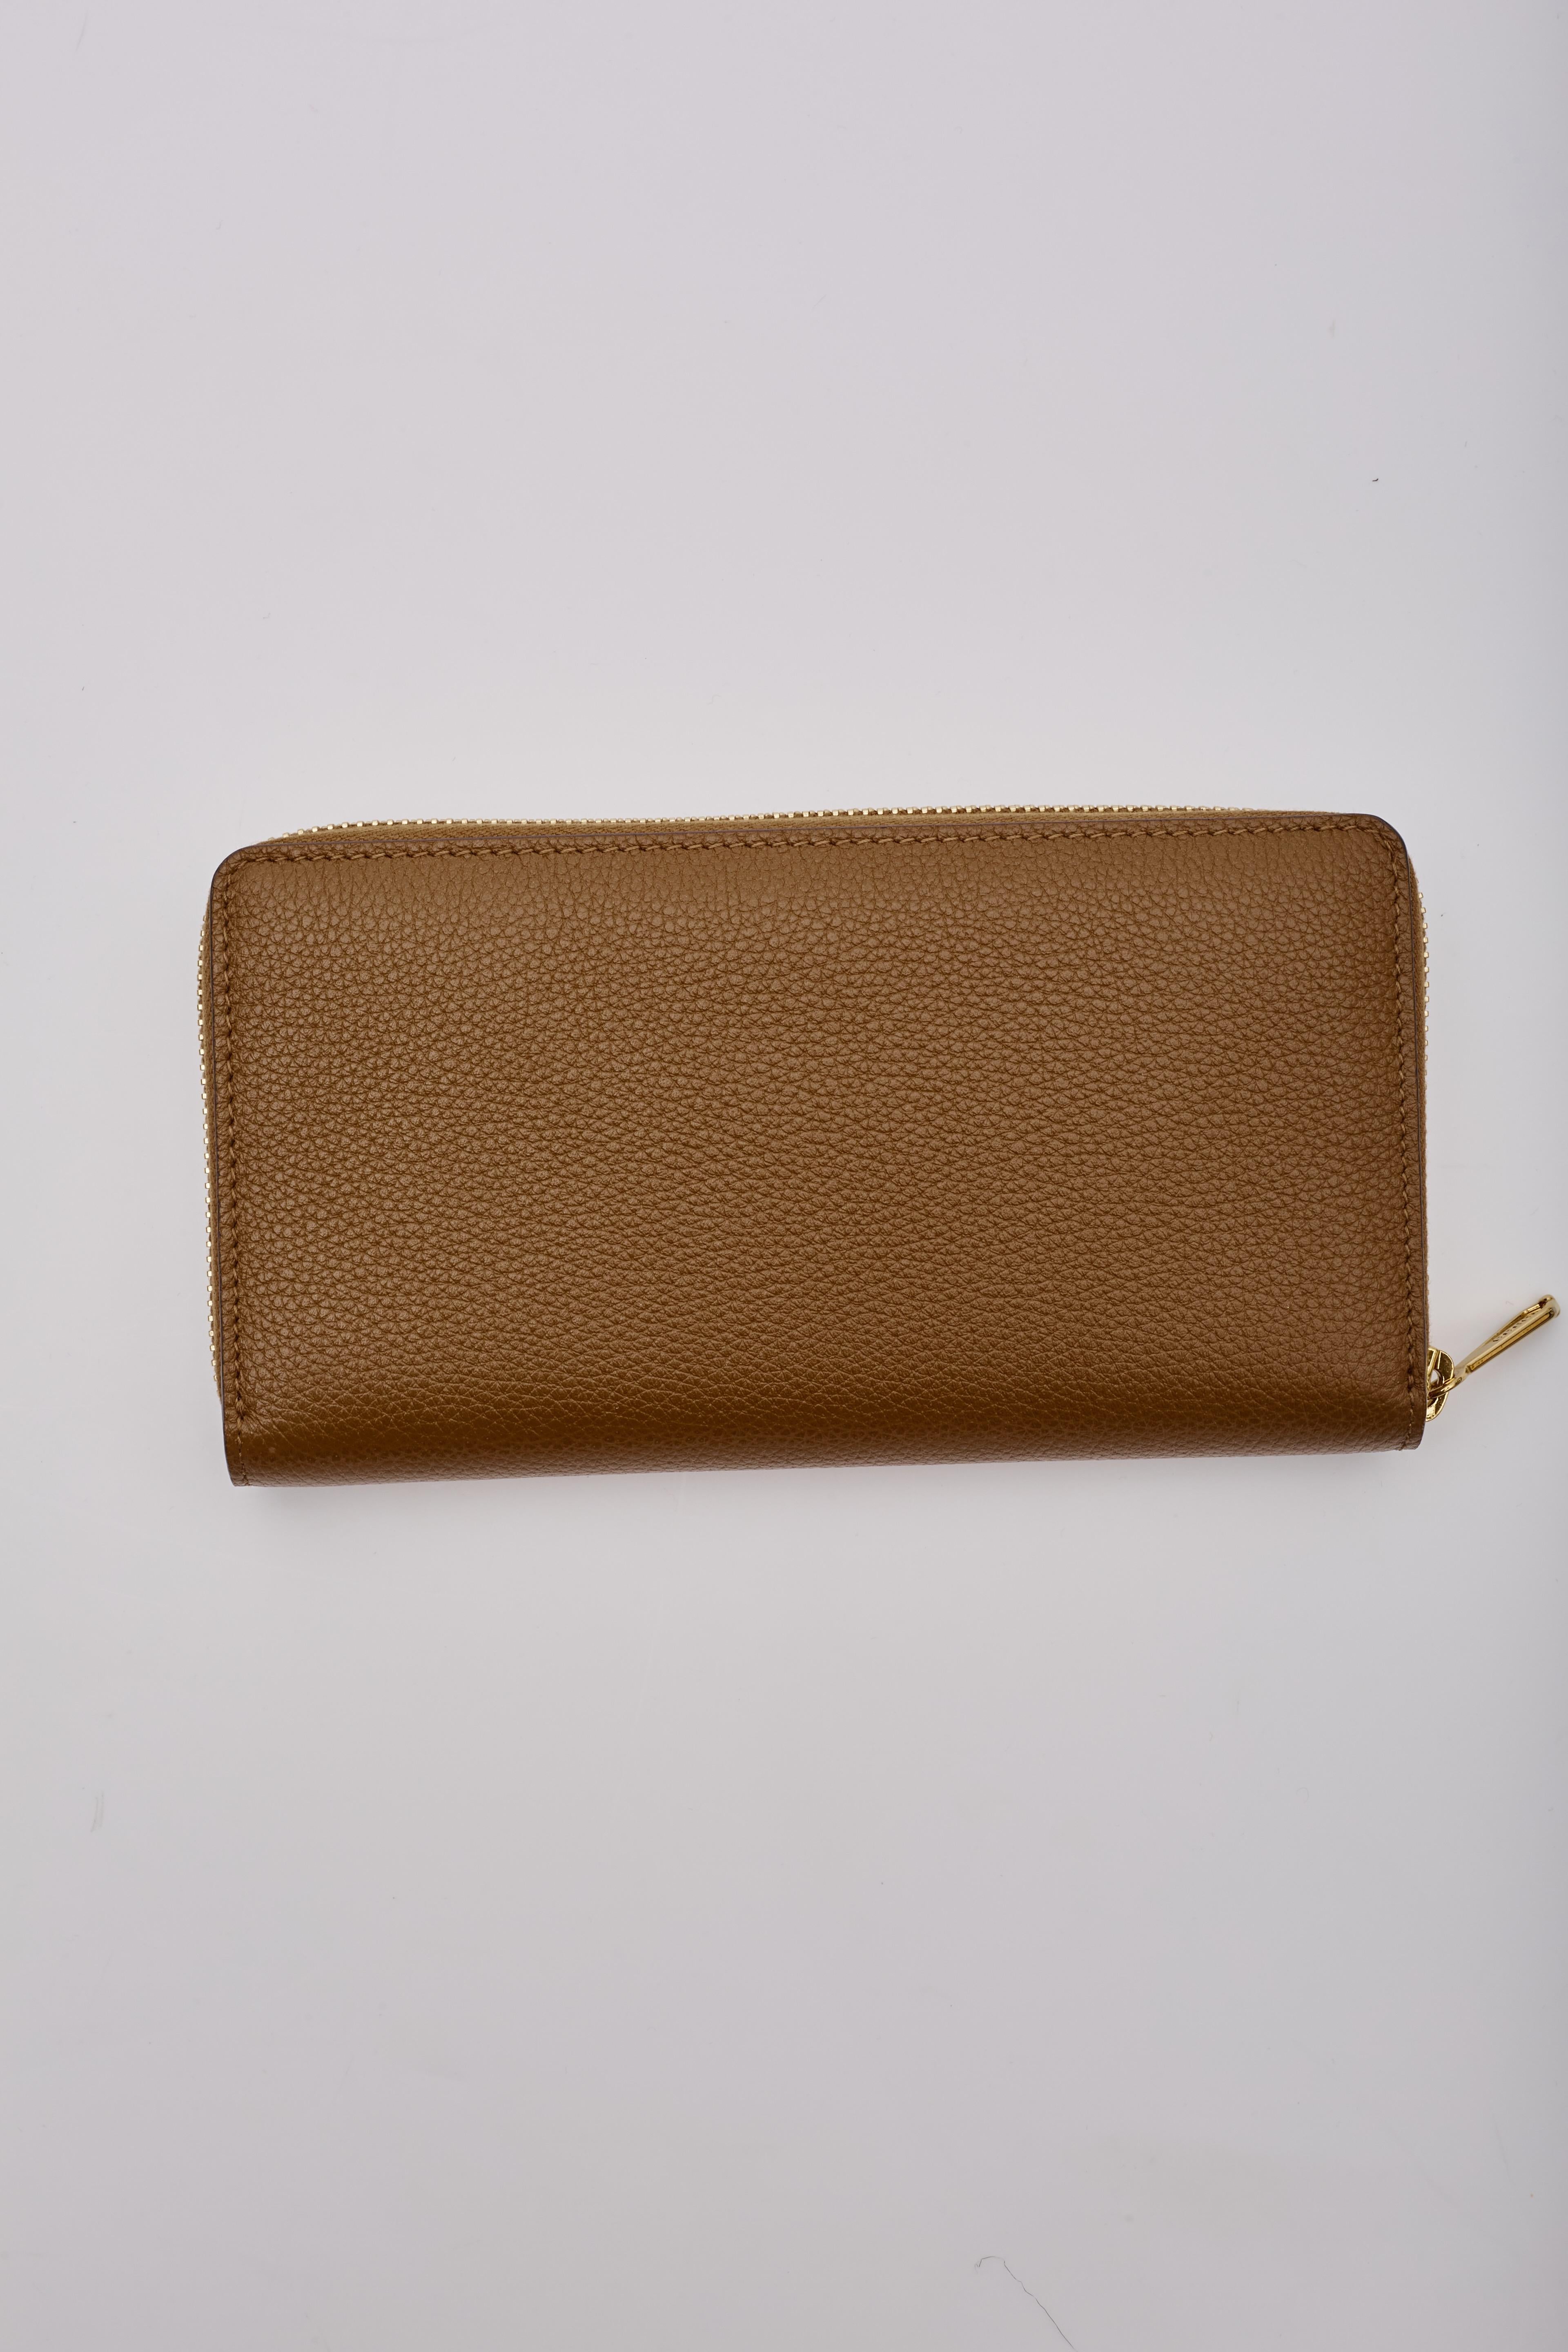 Gucci Zumi leather zip around wallet. Featuring leather construction, a posillipo grain, light fine gold and dark silver hardware, an interlocking g logo with horsebit detail and an interior with leather and fabric lining with interior card